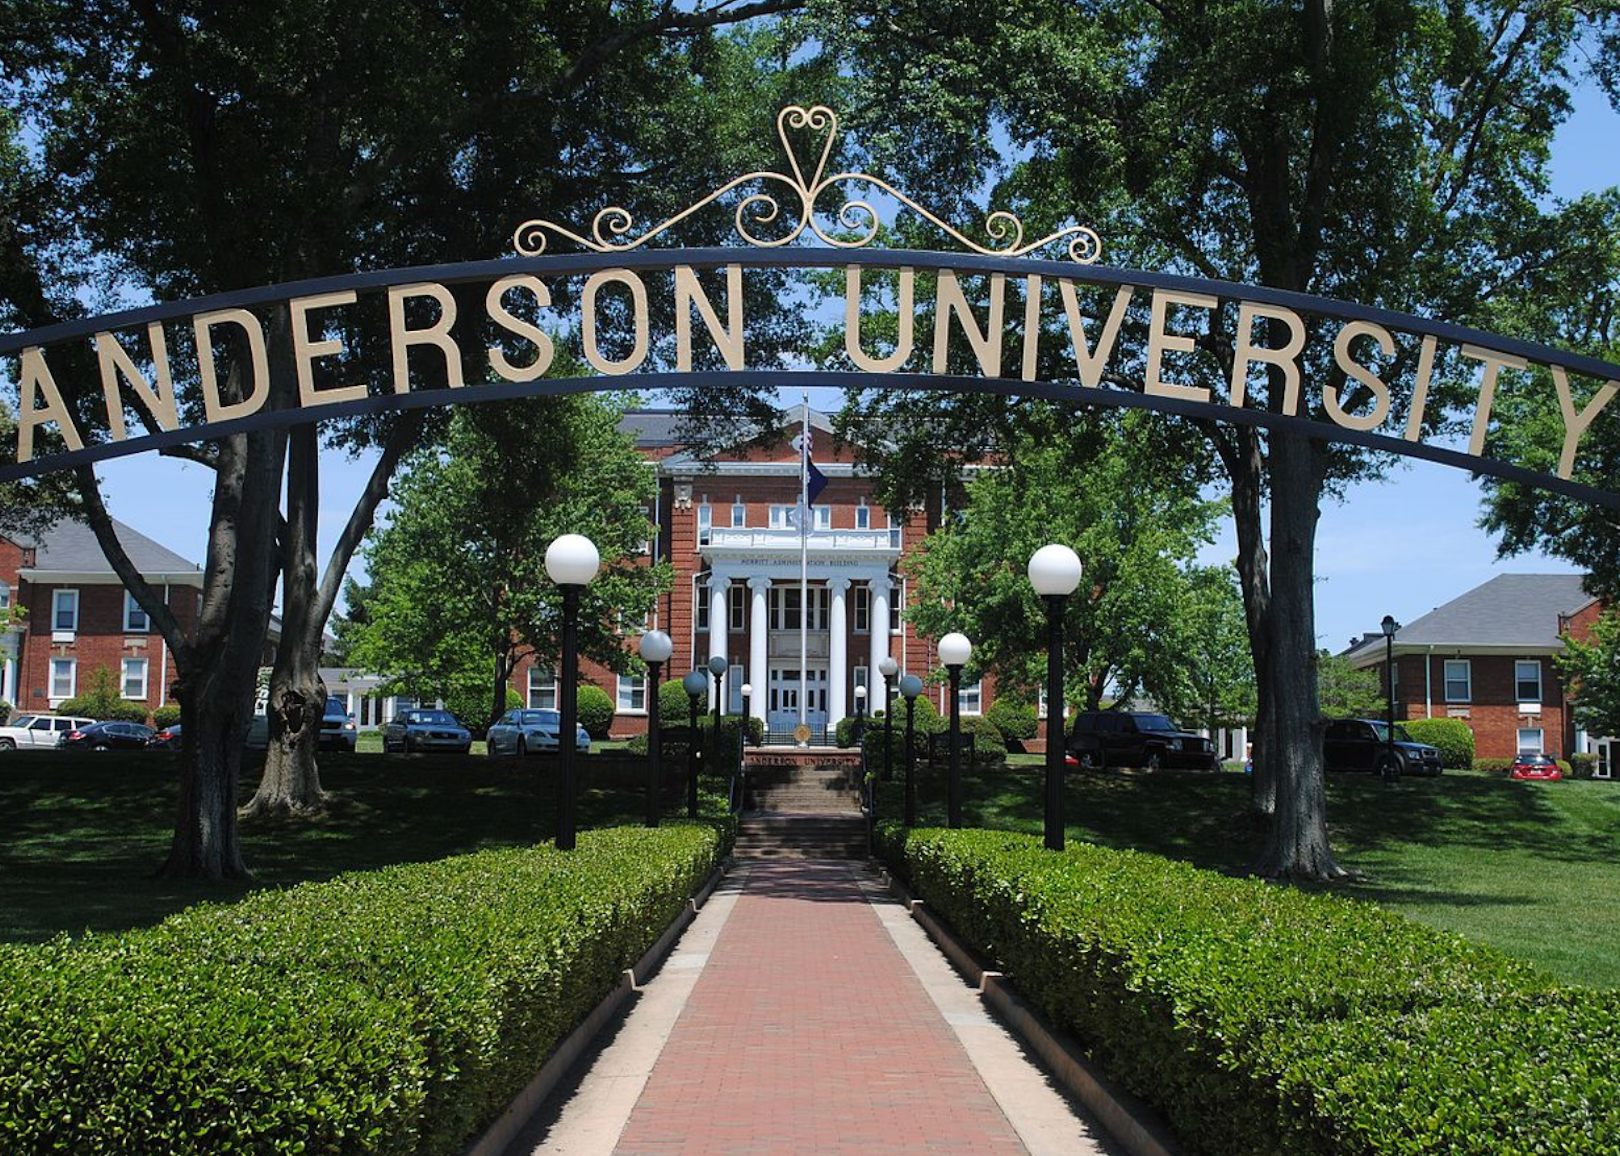 An arched iron sign to Anderson University.